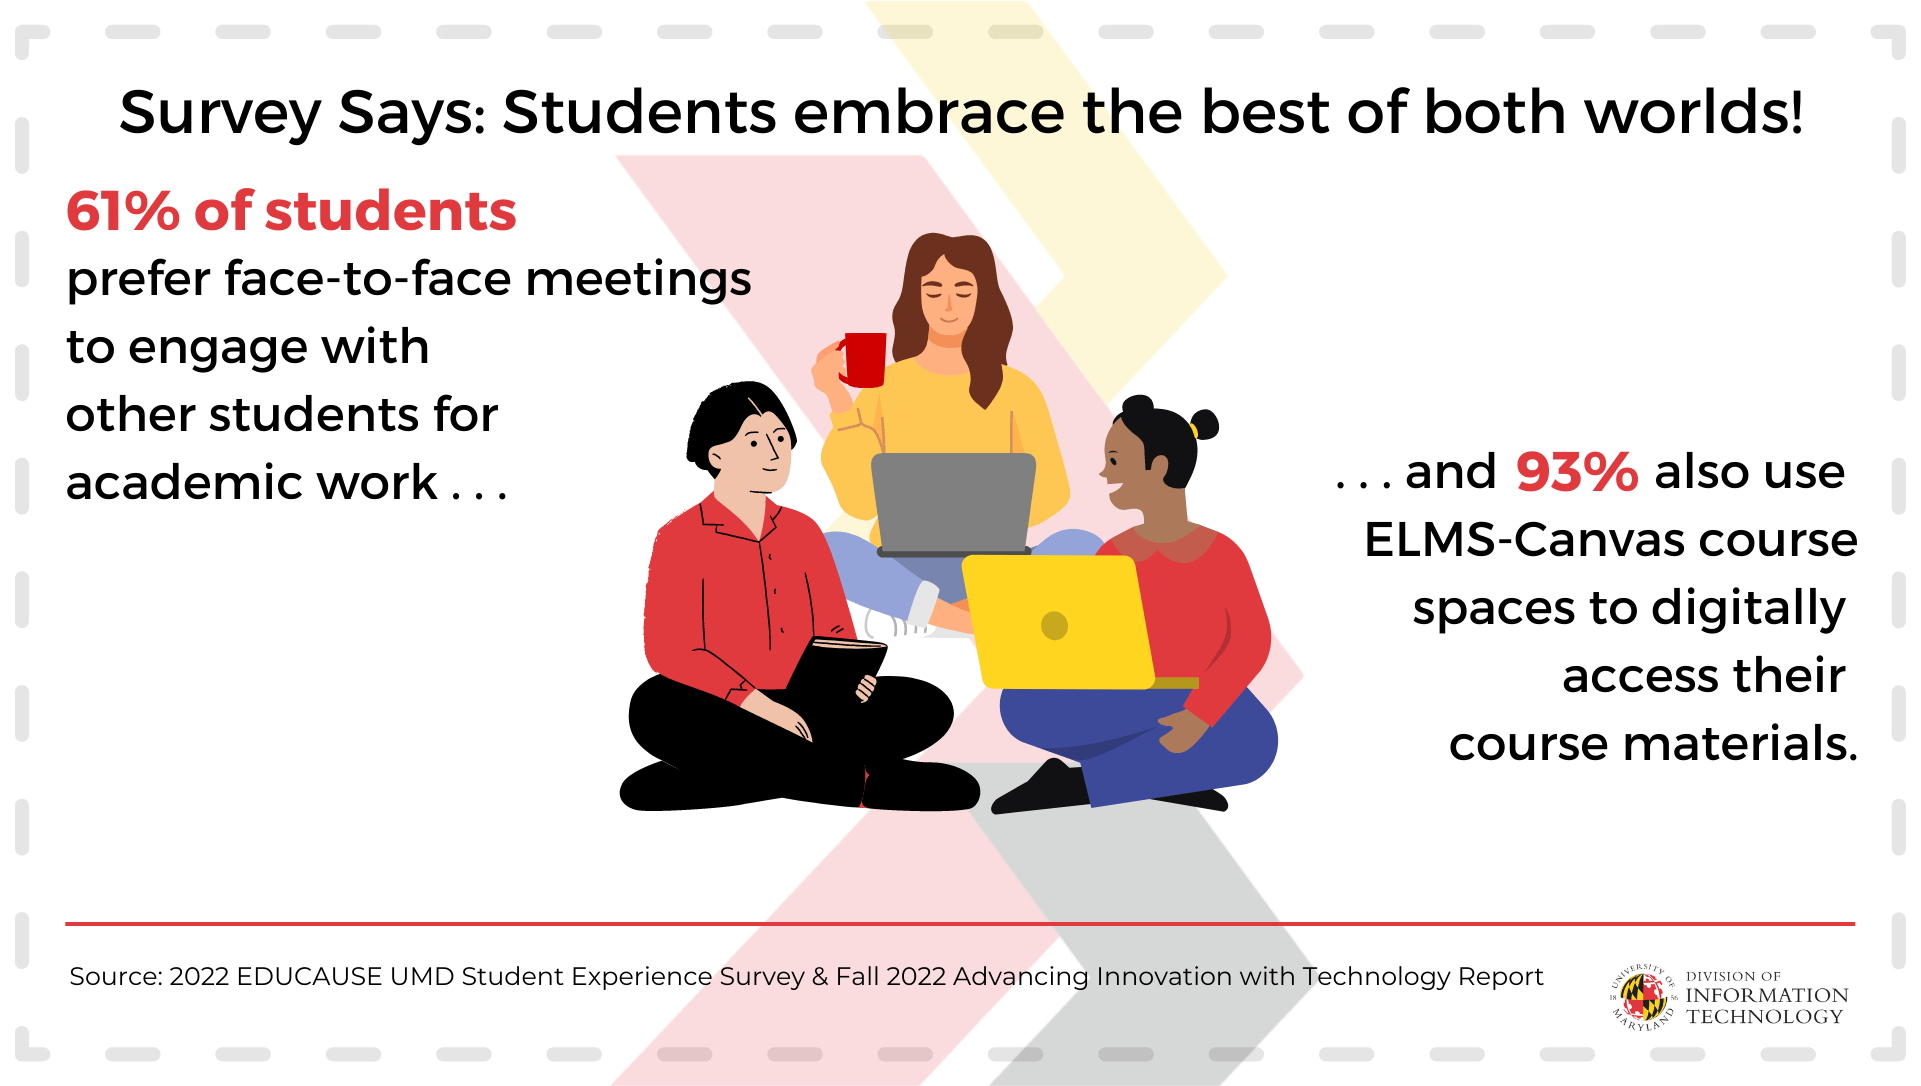 Survey Says: Students embrace the best of both worlds! 61% of students prefer face-to-face meetings to engage with other students for academic work, and 93% also use ELMS-Canvas course spaces to digitally access their course materials.